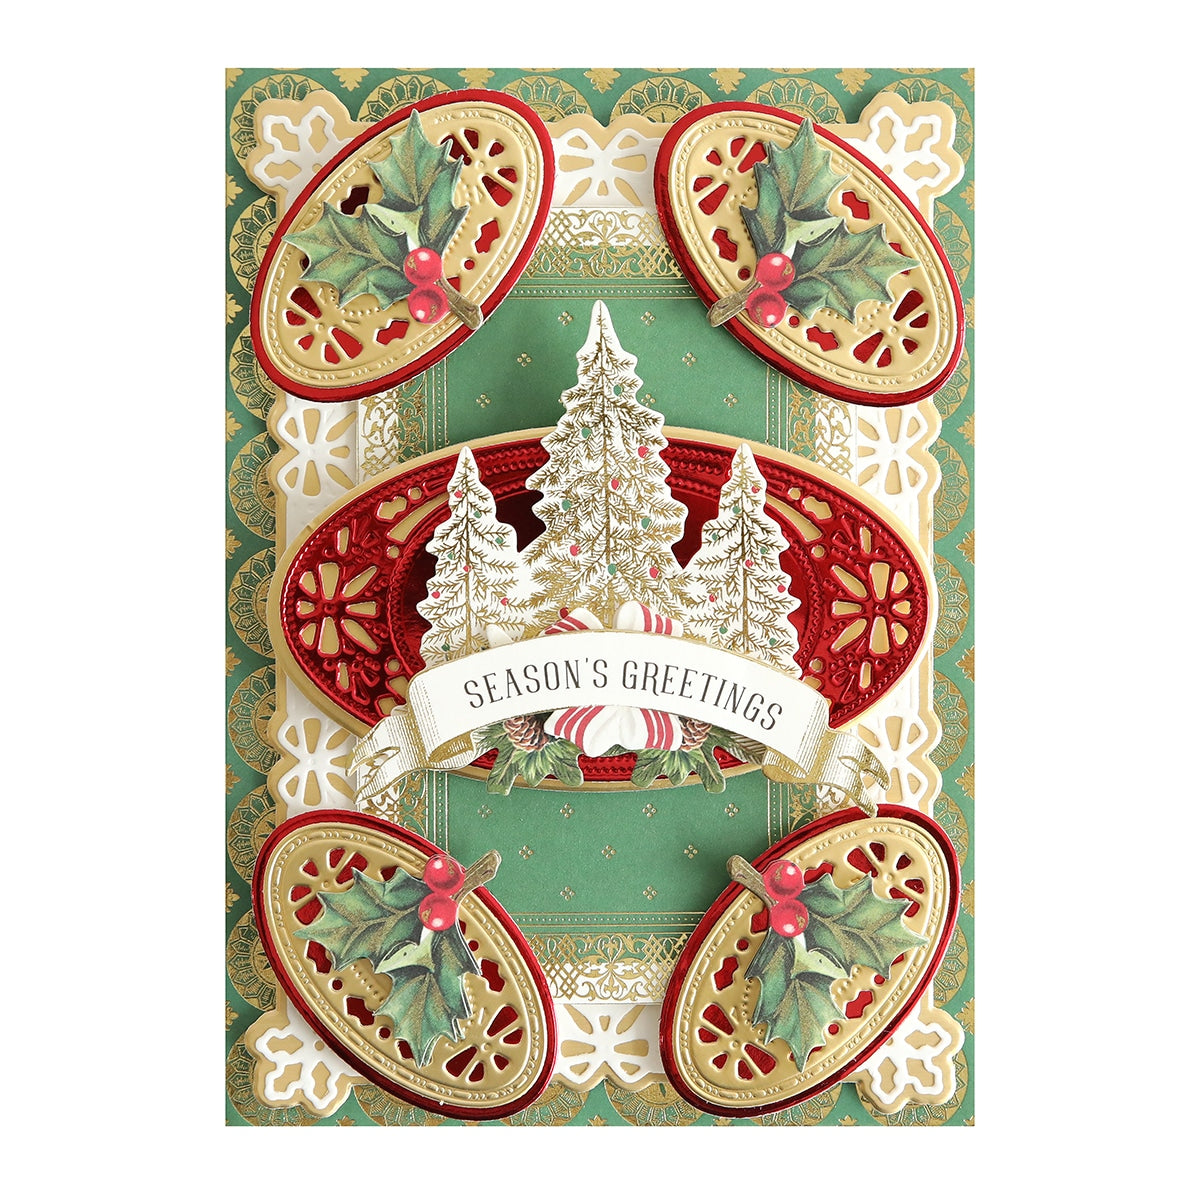 A Christmas Wishes Luxury Matte Foil with holly and pine trees.